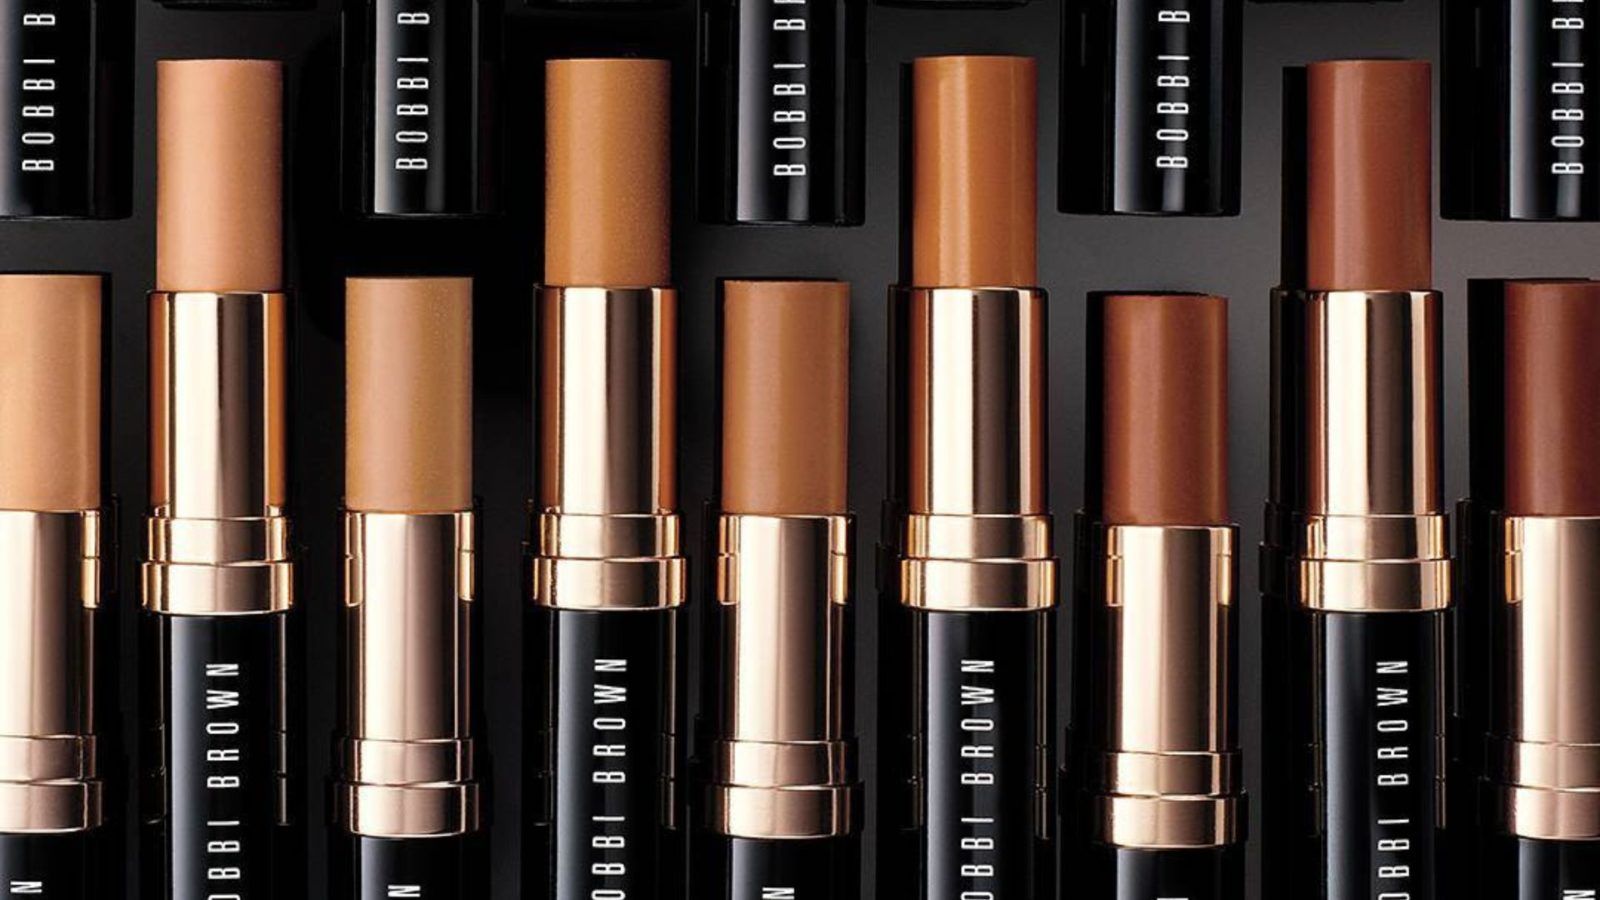 The best foundation sticks to explore right now for your makeup vanity